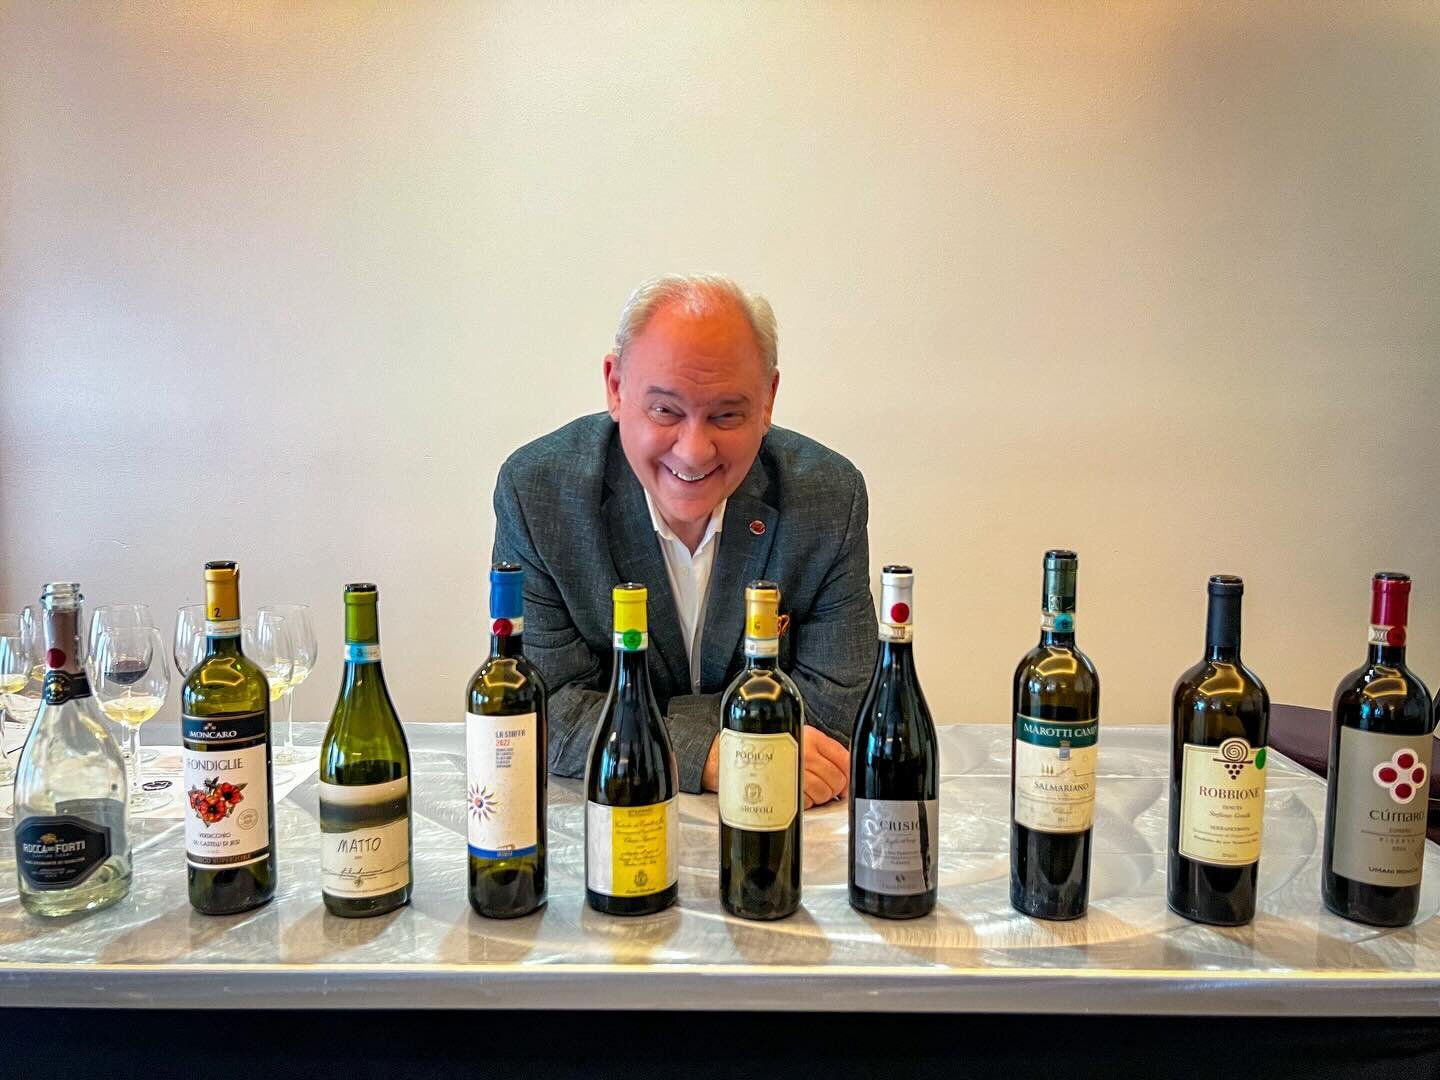 It is always an honor to present great wines at #simplyitalian for @ieemusa - this past week I was pleased to offer the seminars including this wonderful roundup of (undeservedly) little known wines from #lemarche. I think we made some new friends fo